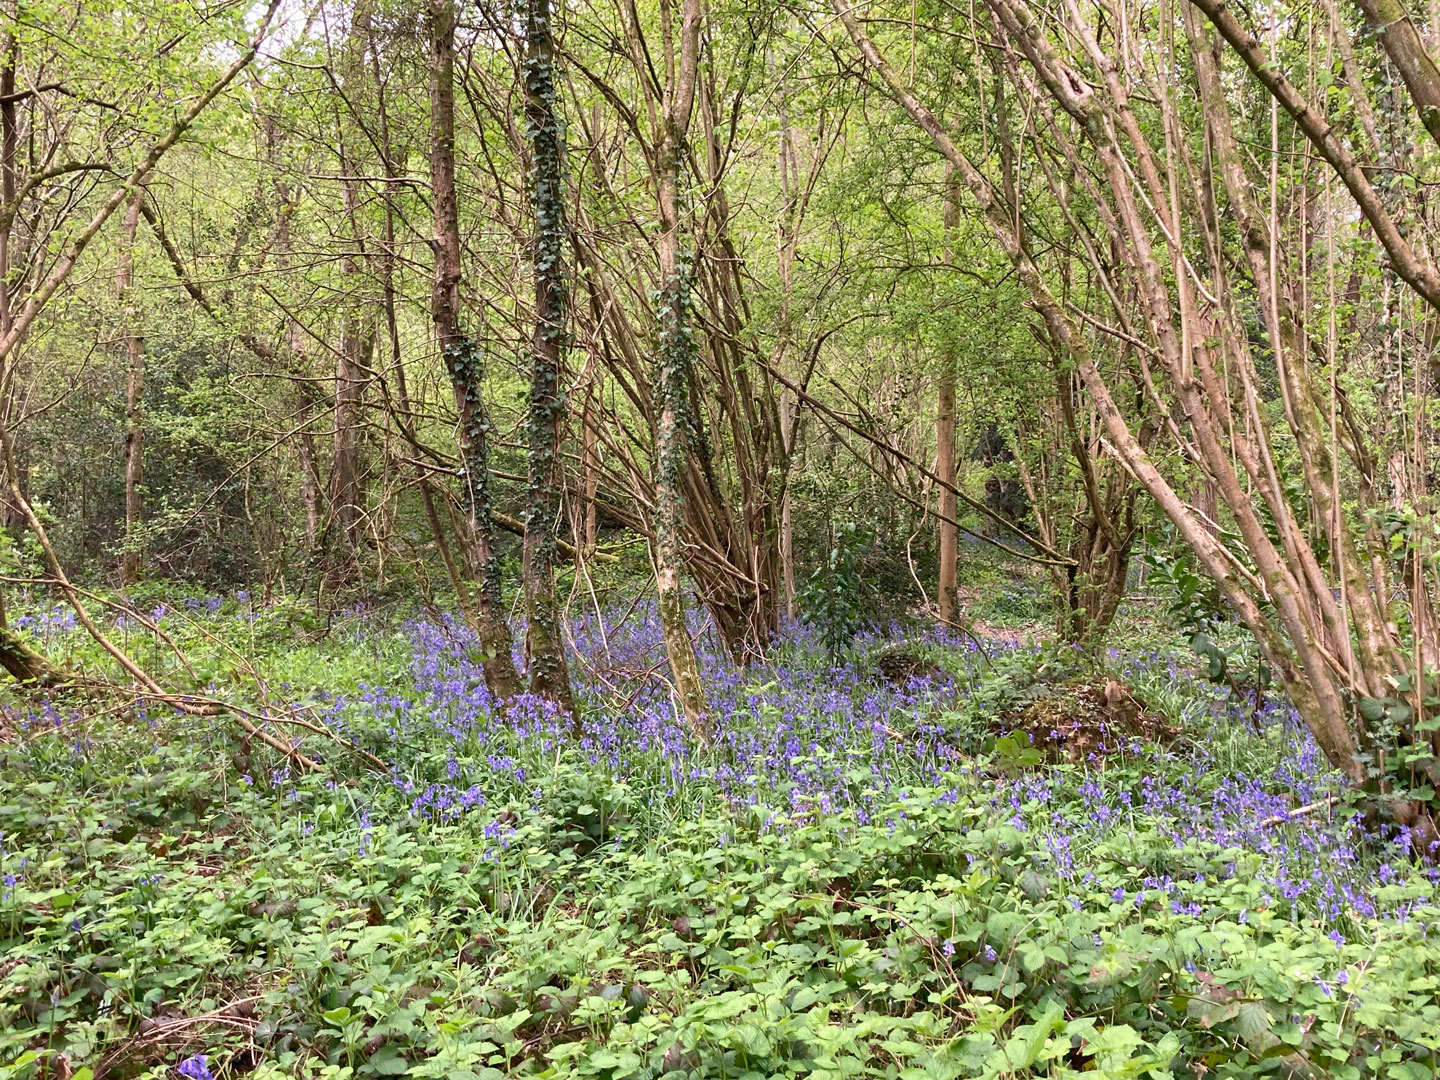 English bluebell woods